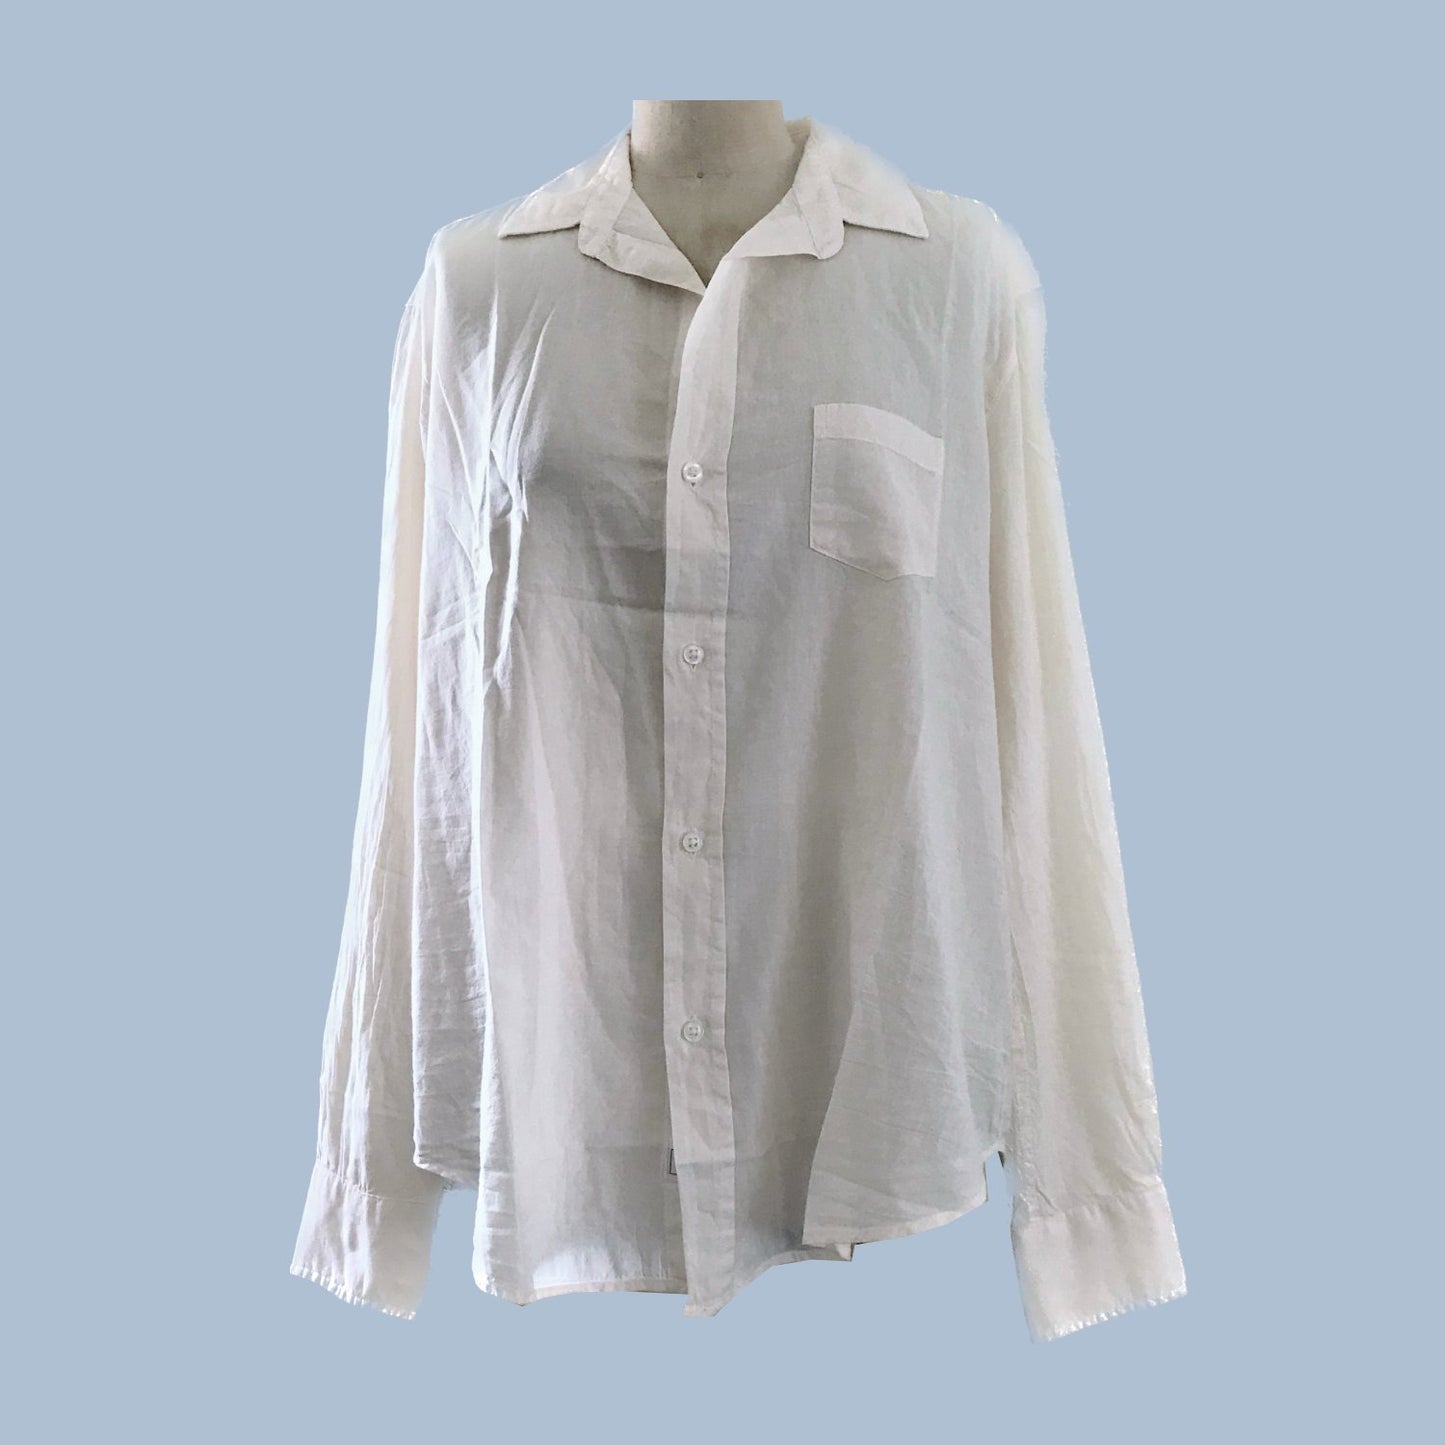 Frank & Eileen Ivory Featherweight Organic Cotton Casual Shirt Top